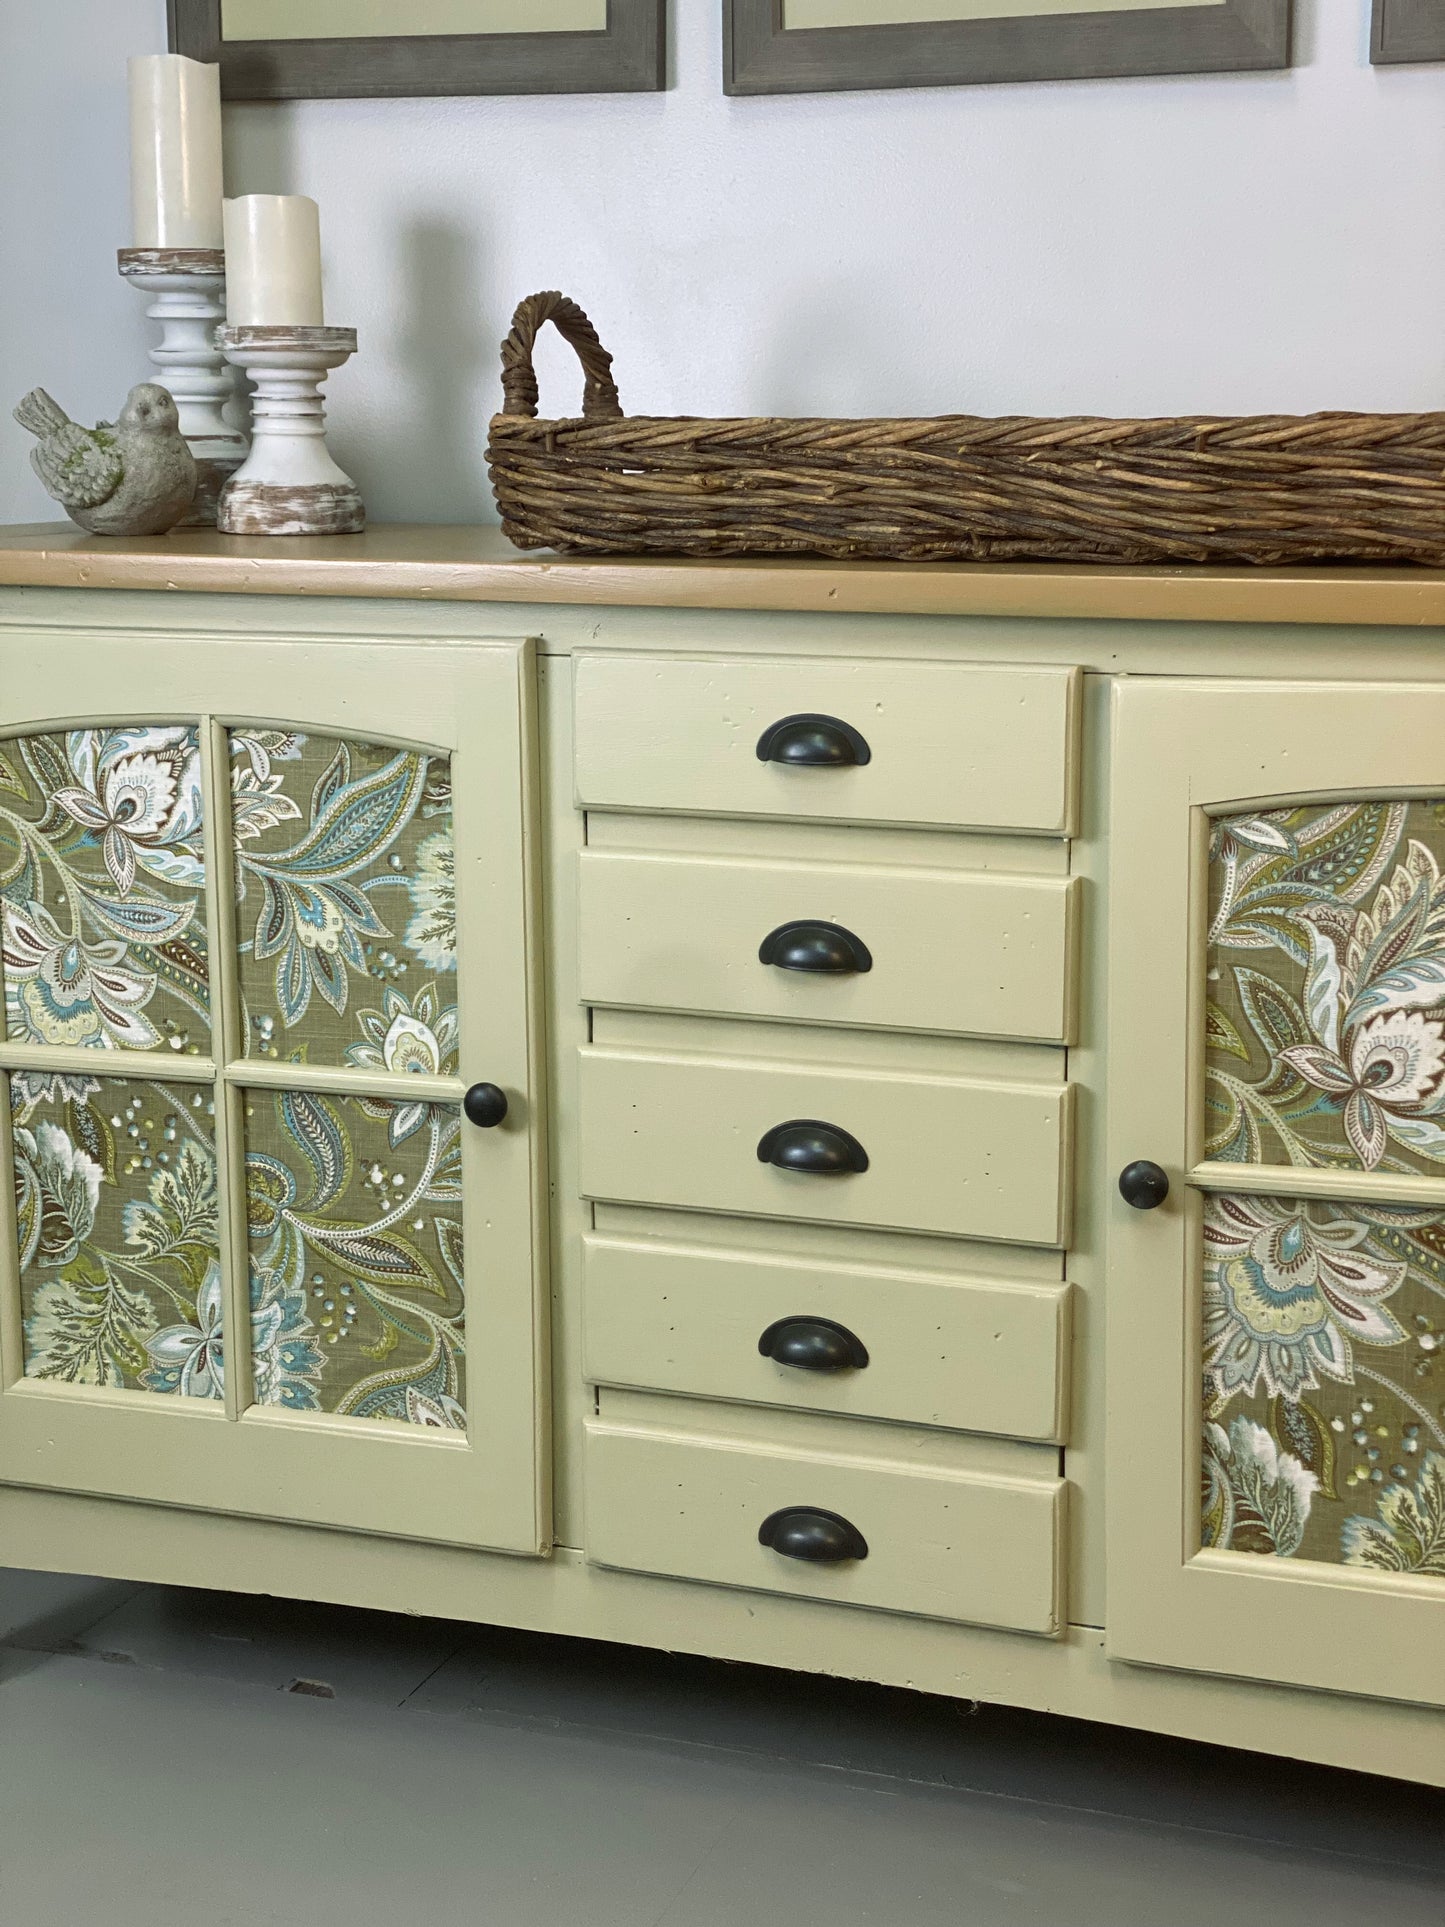 Grassland Furniture and Cabinet Paint